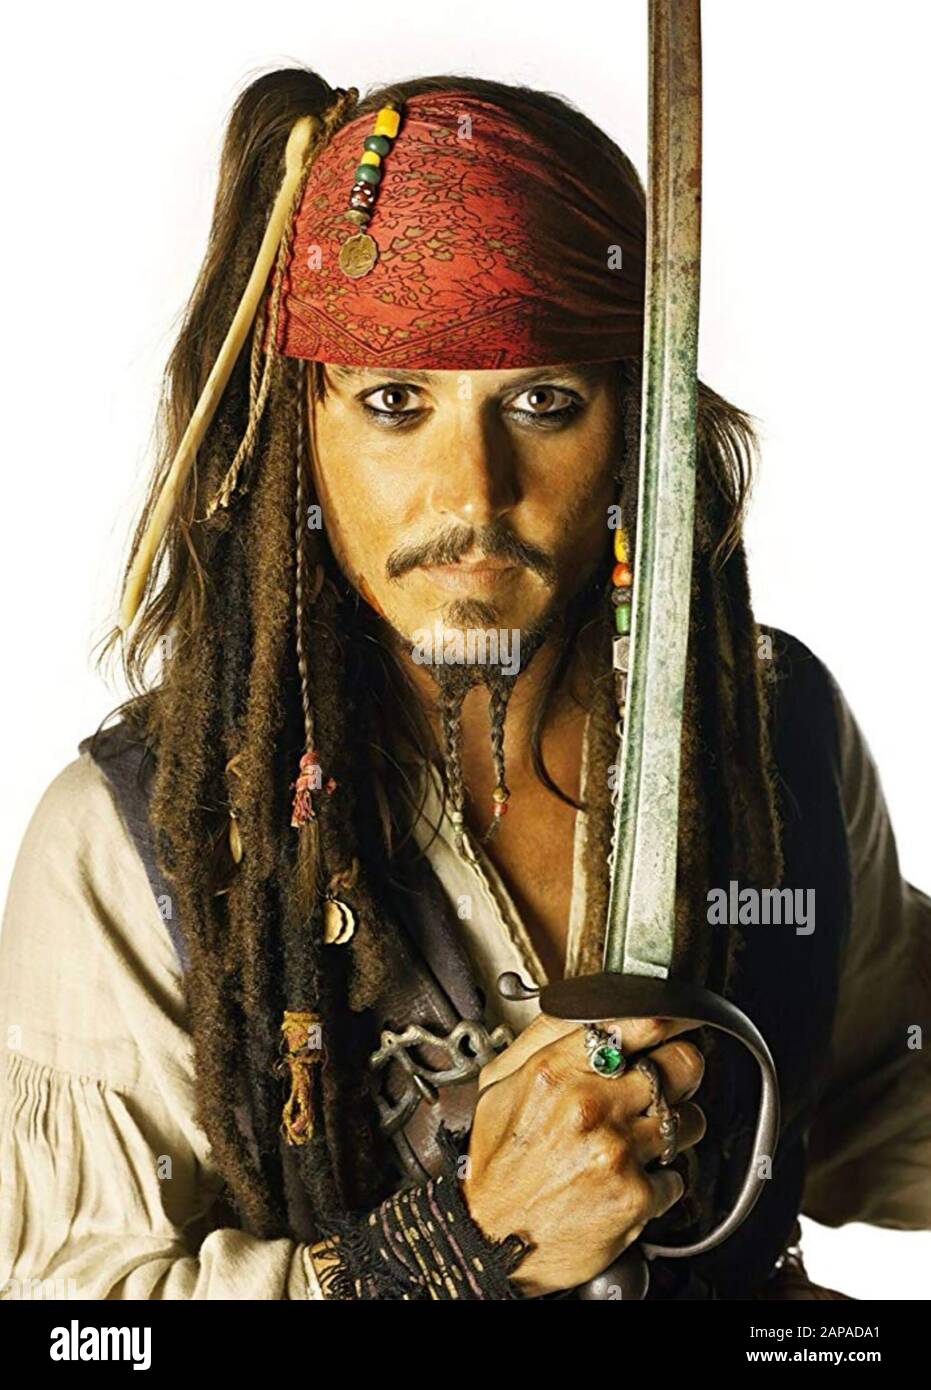 PIRATES OF THE CARIBBEAN: THE CURSE OF THE BLACK PEARL 2003 Buena Vista film with Johnny Depp Stock Photo